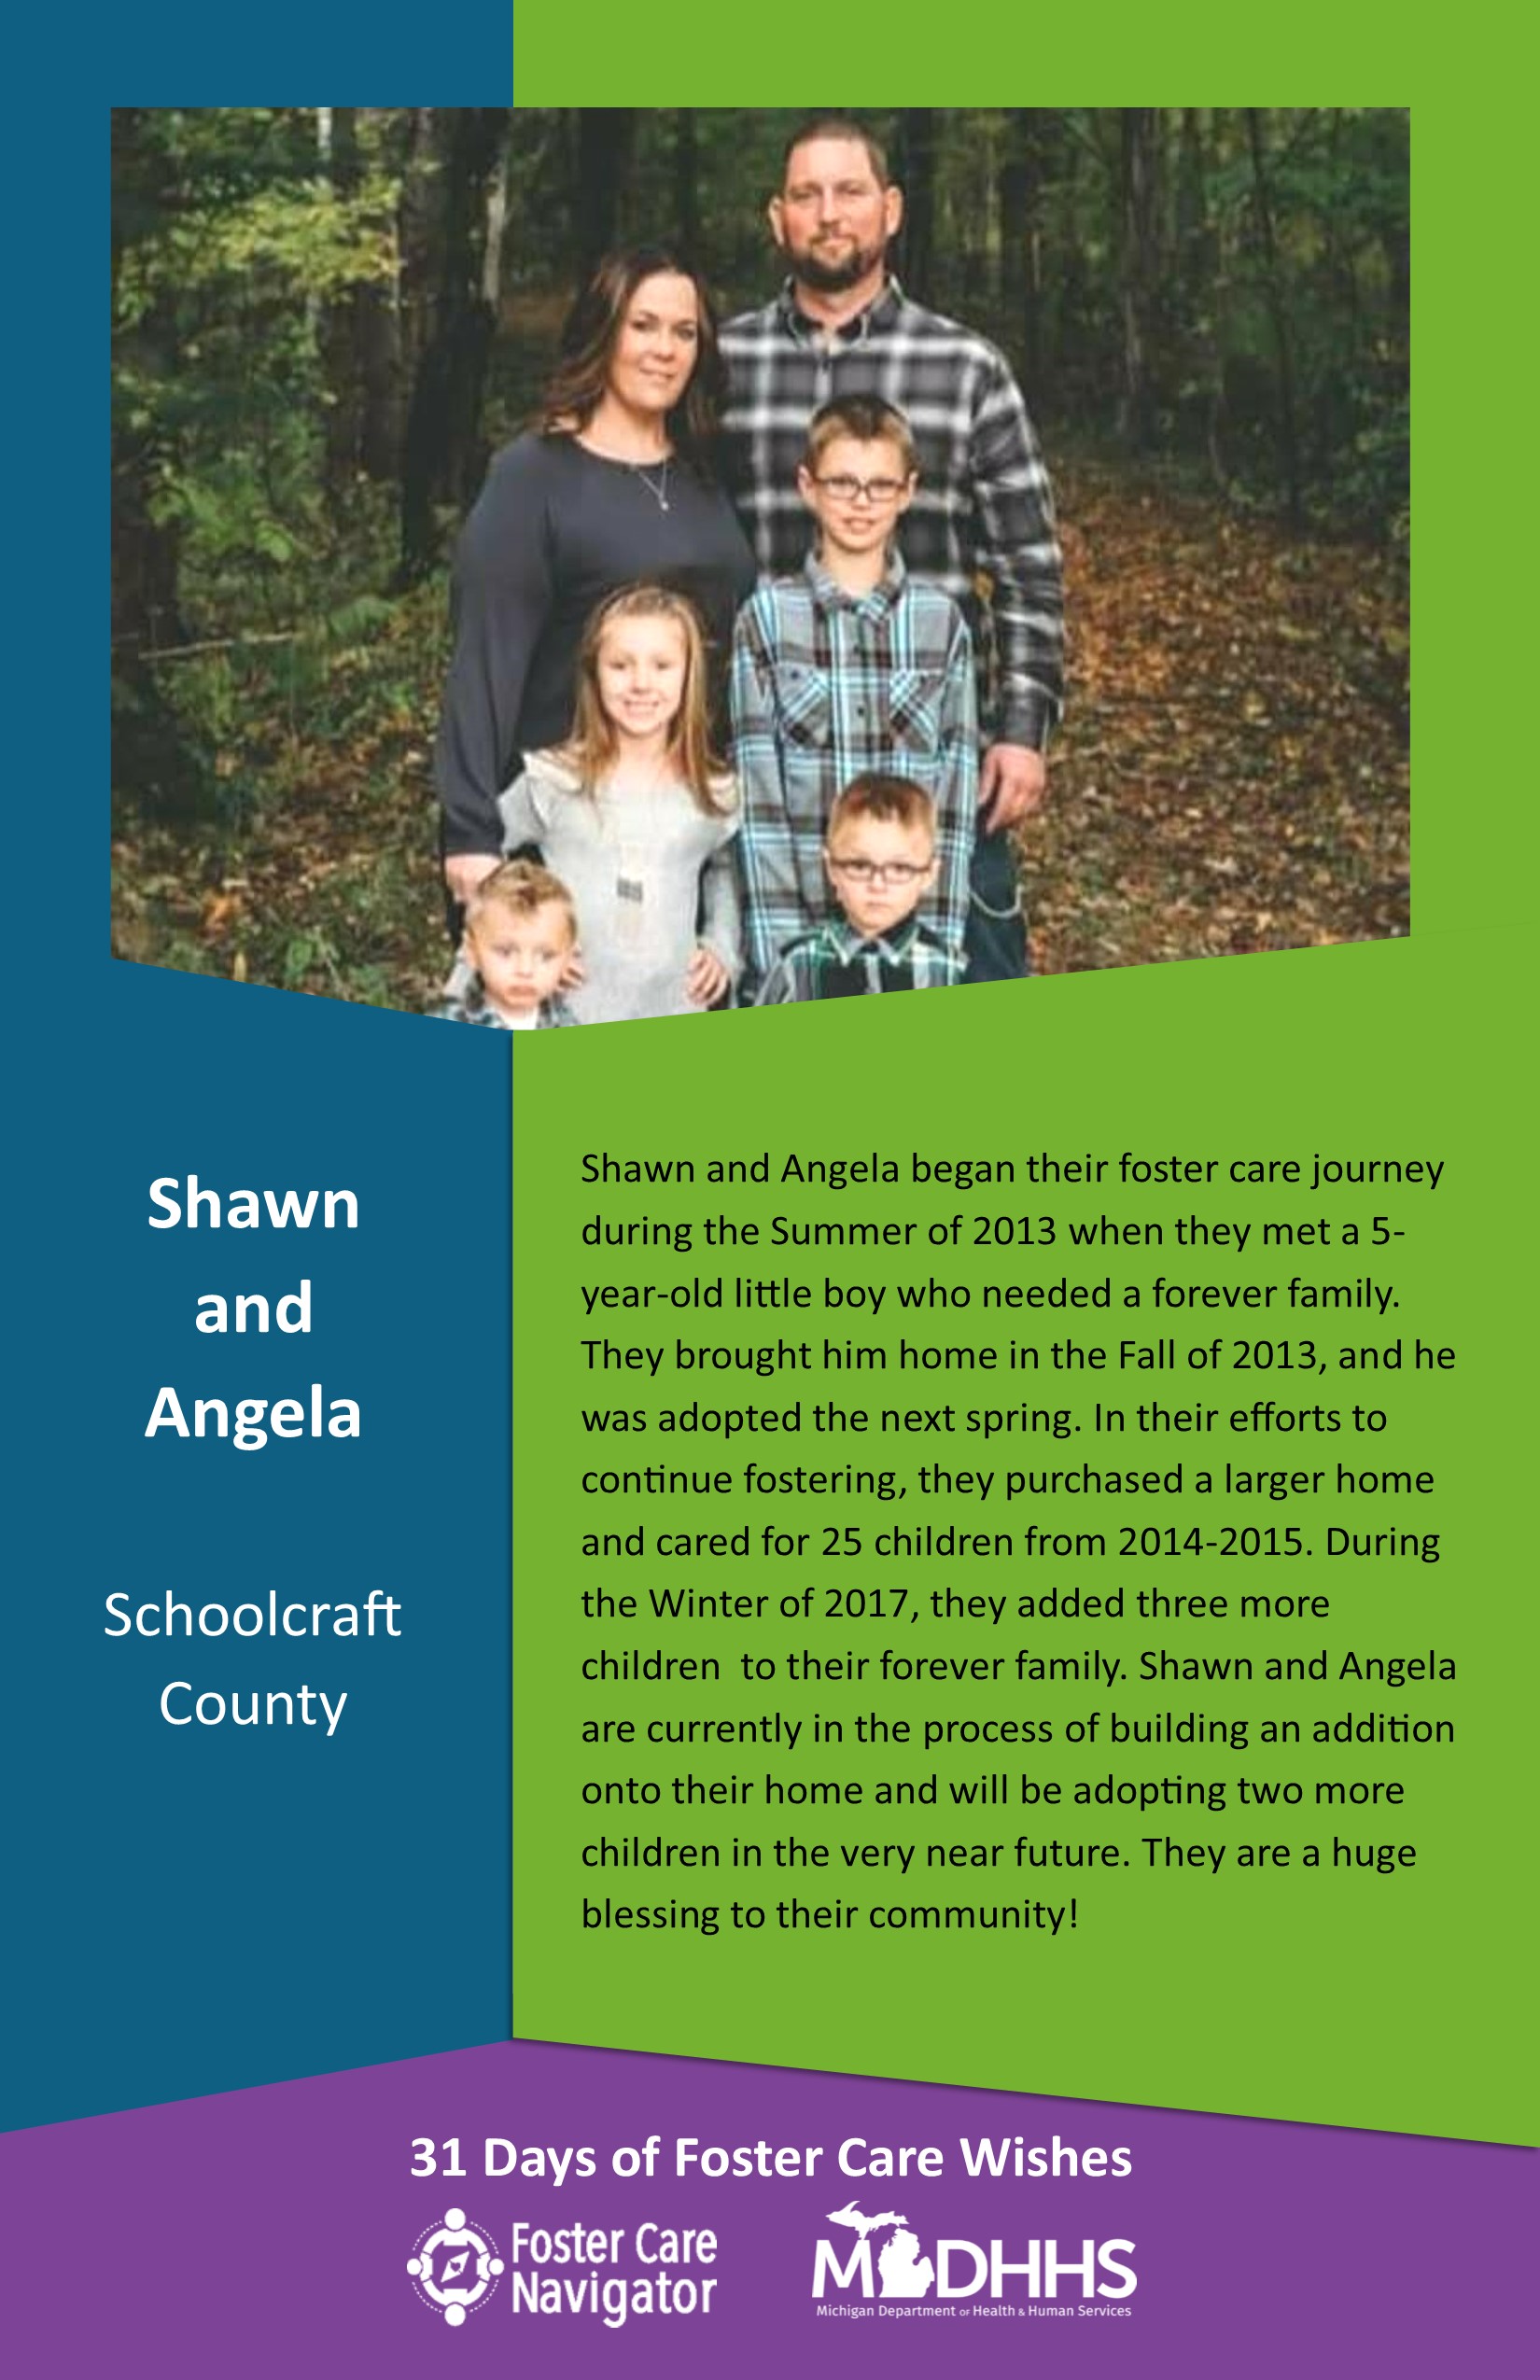 This full page feature includes all of the text listed in the body of this blog post as well as a photo of Shawn and Angela. The background is blue on the left, green on the right, and purple at the bottom of the page where the logos are located.